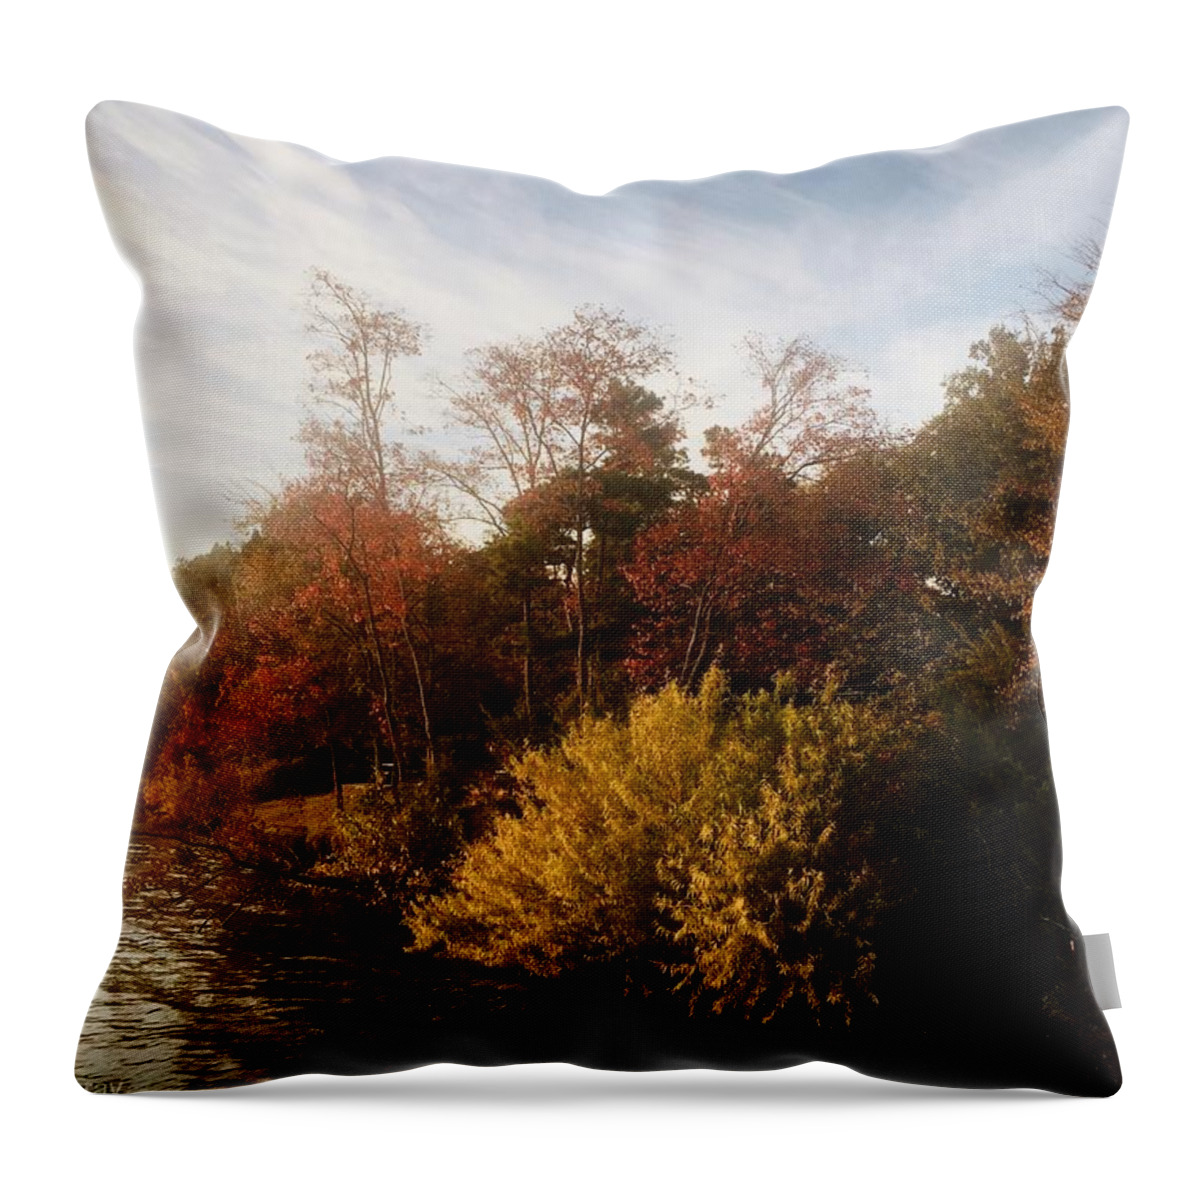 Fall Throw Pillow featuring the photograph Fall Colors by Kelly Thackeray